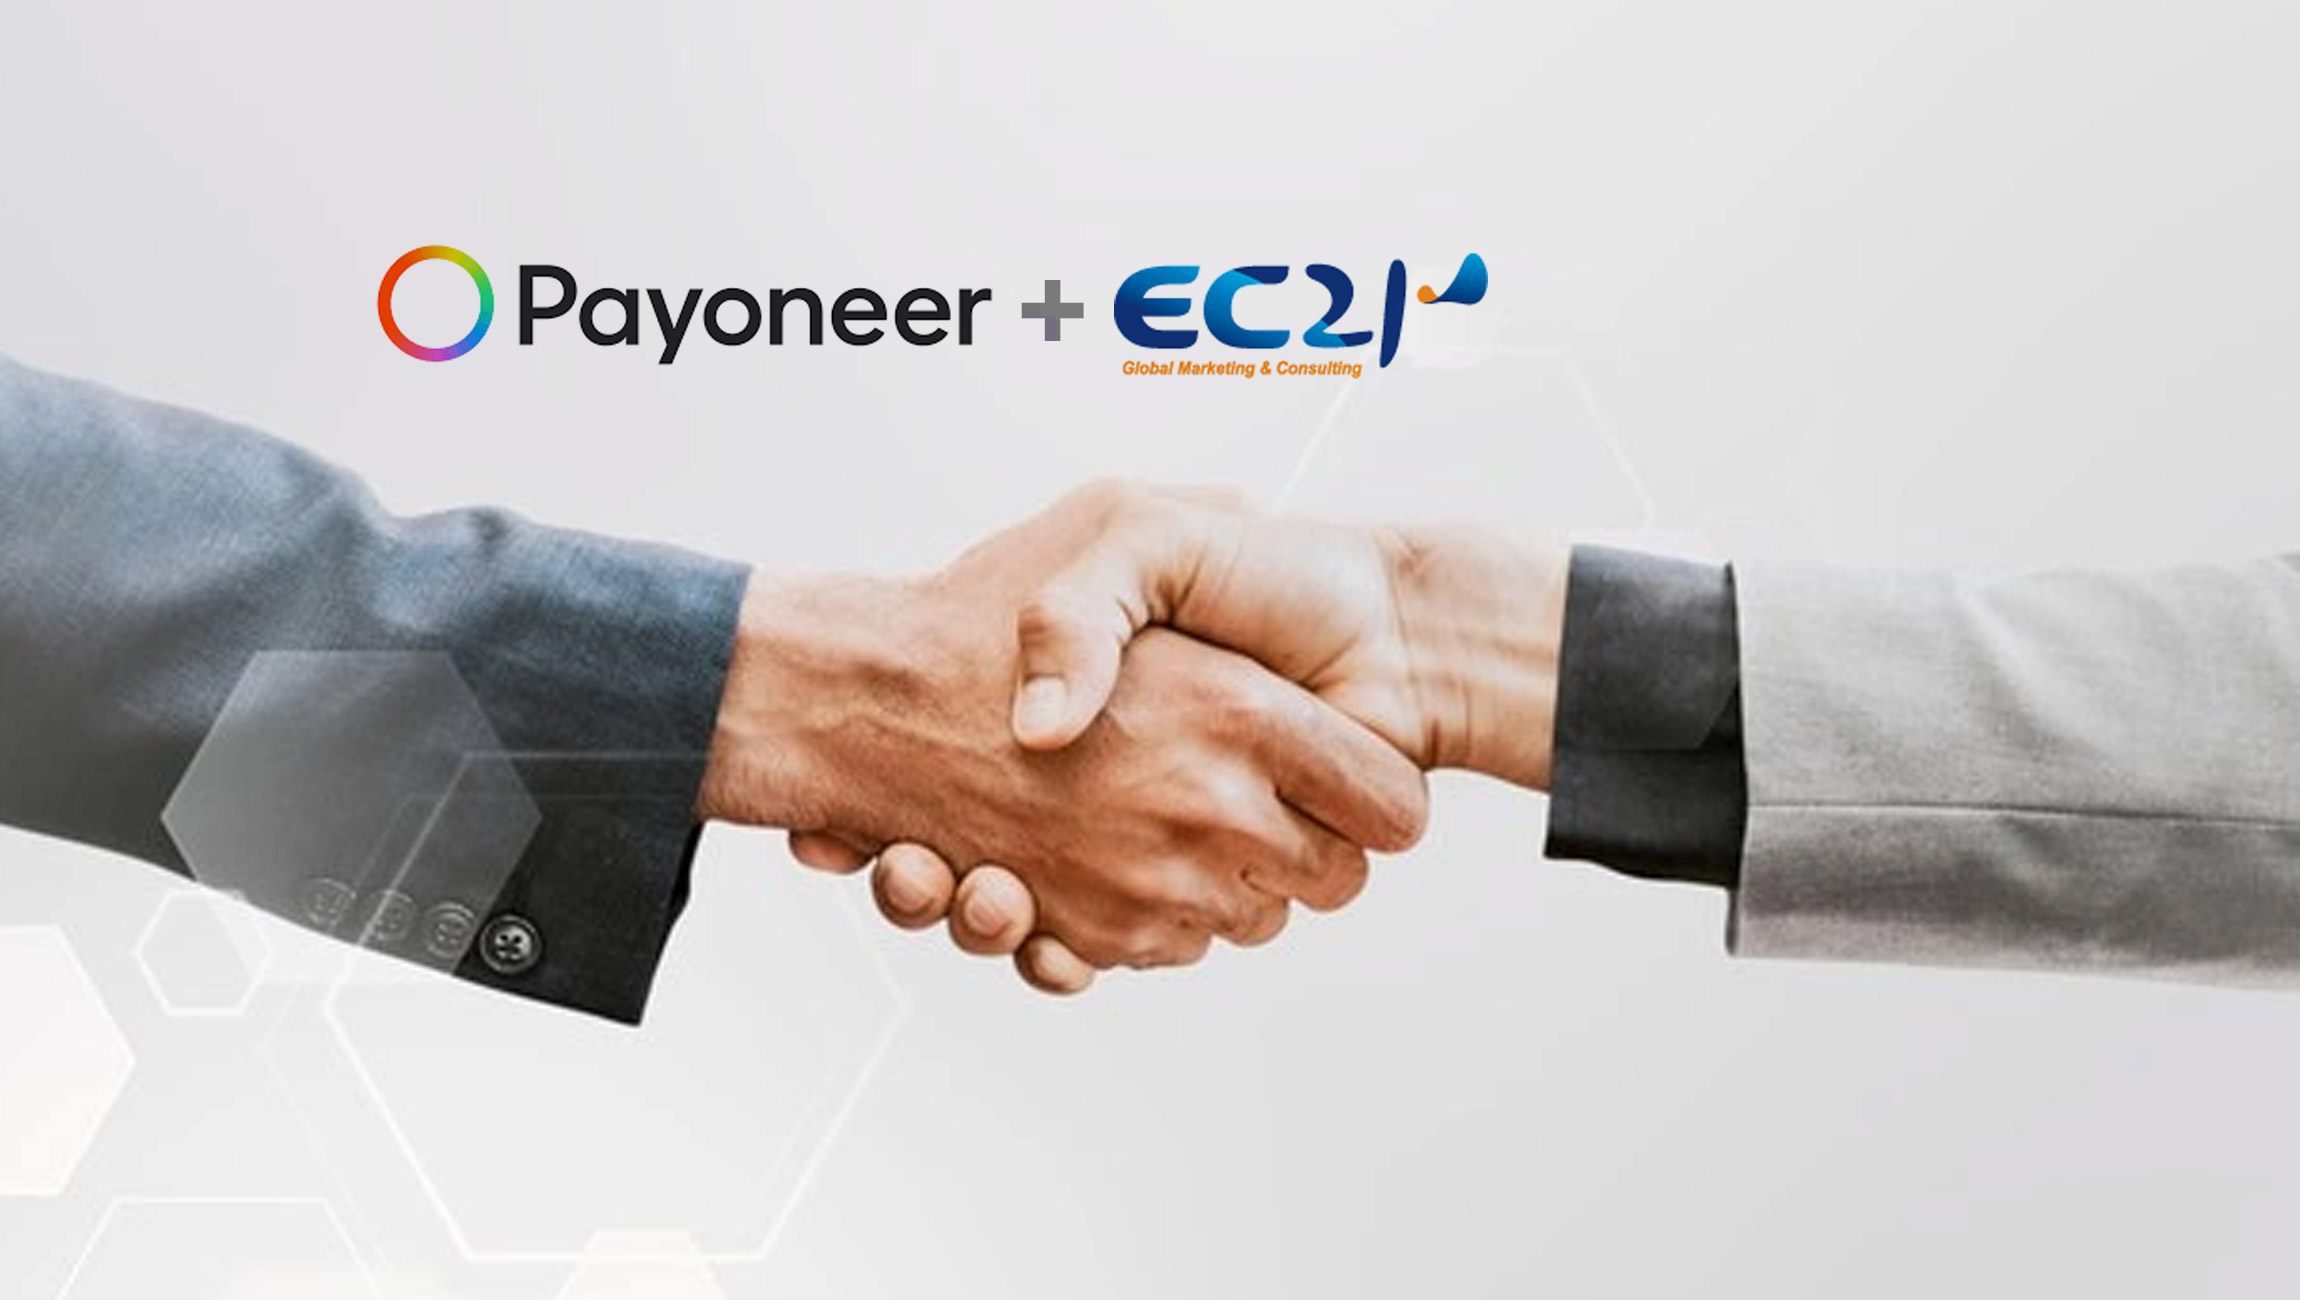 Payoneer Partners With EC21 to Grow Korean SMBs Globally